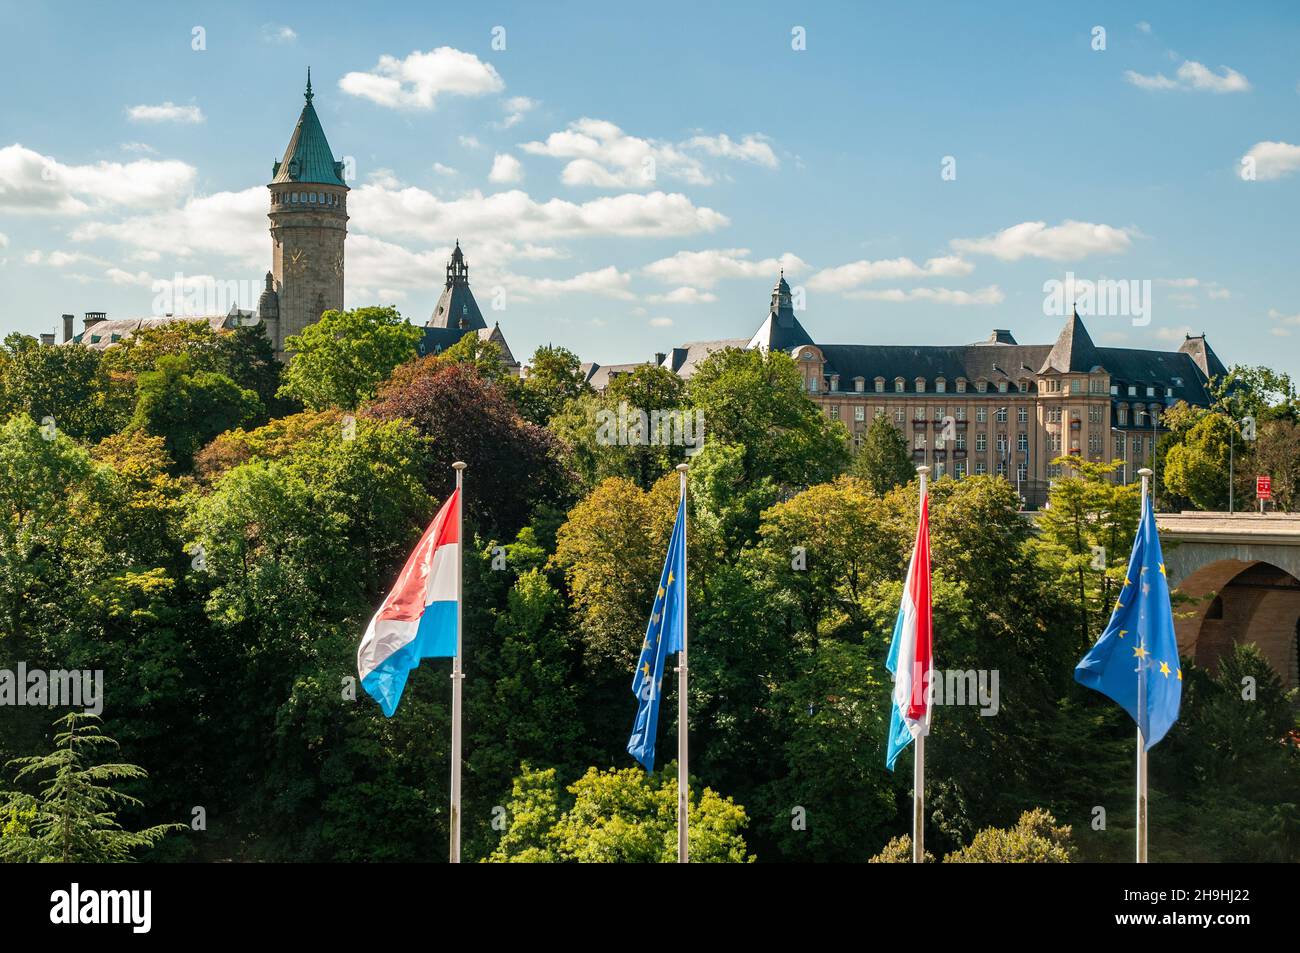 Musée de la Banque (Bank Museum, left) and State Bank and Savings Fund buildings with Luxembourg and EU flags in the foreground, Luxembourg City. Stock Photo